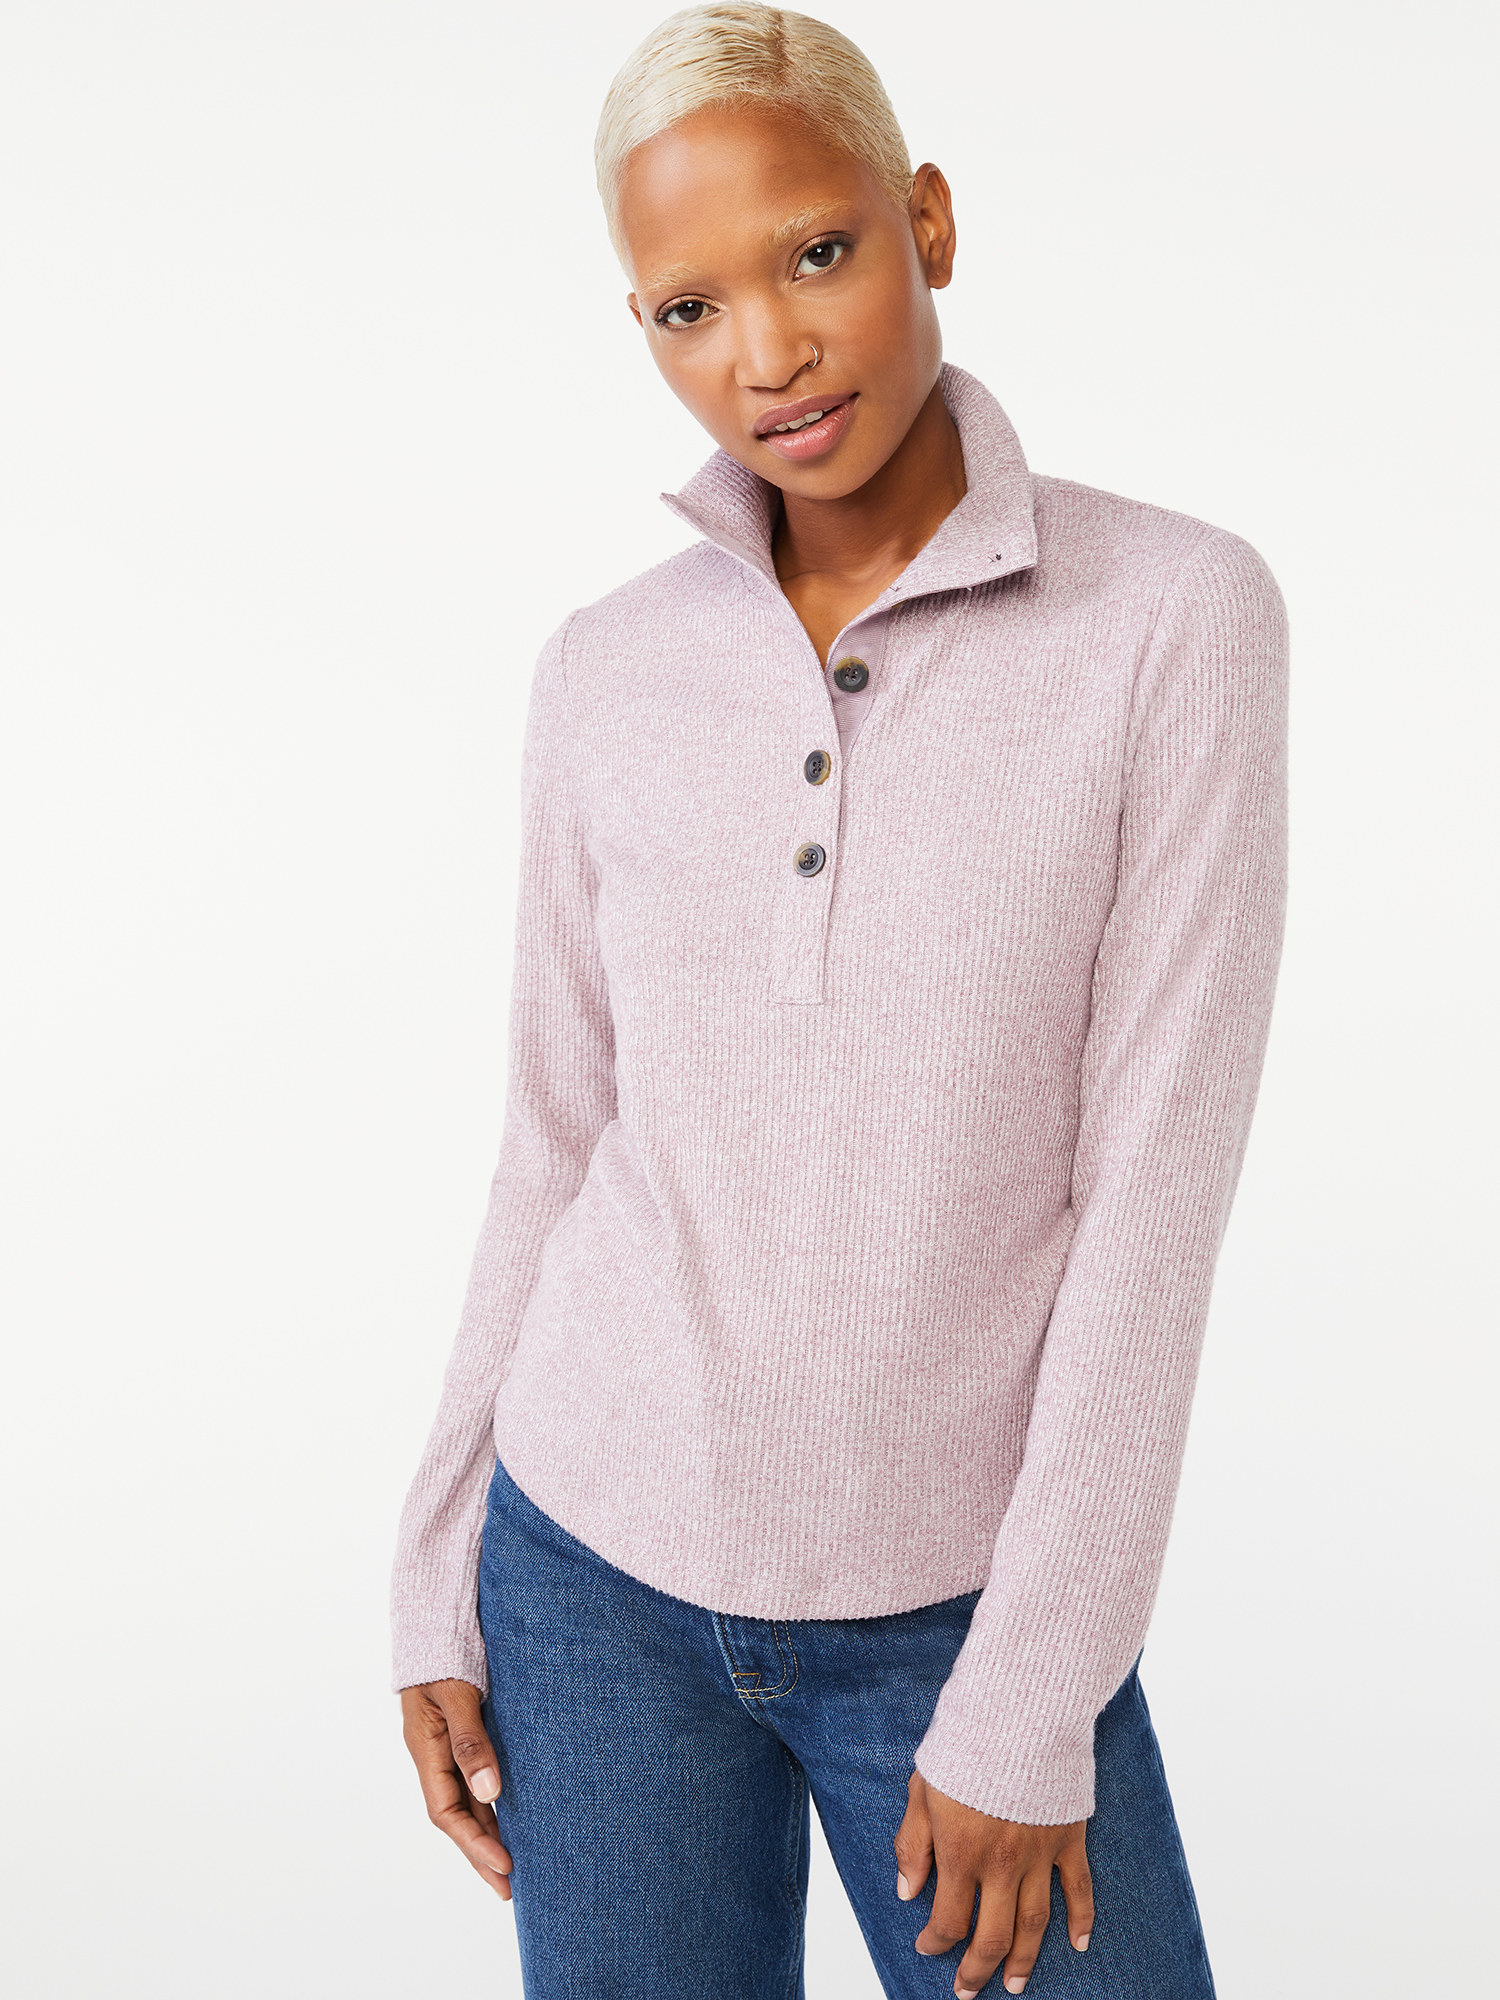 a model in a lilac pull-over henley and dark wash jeans